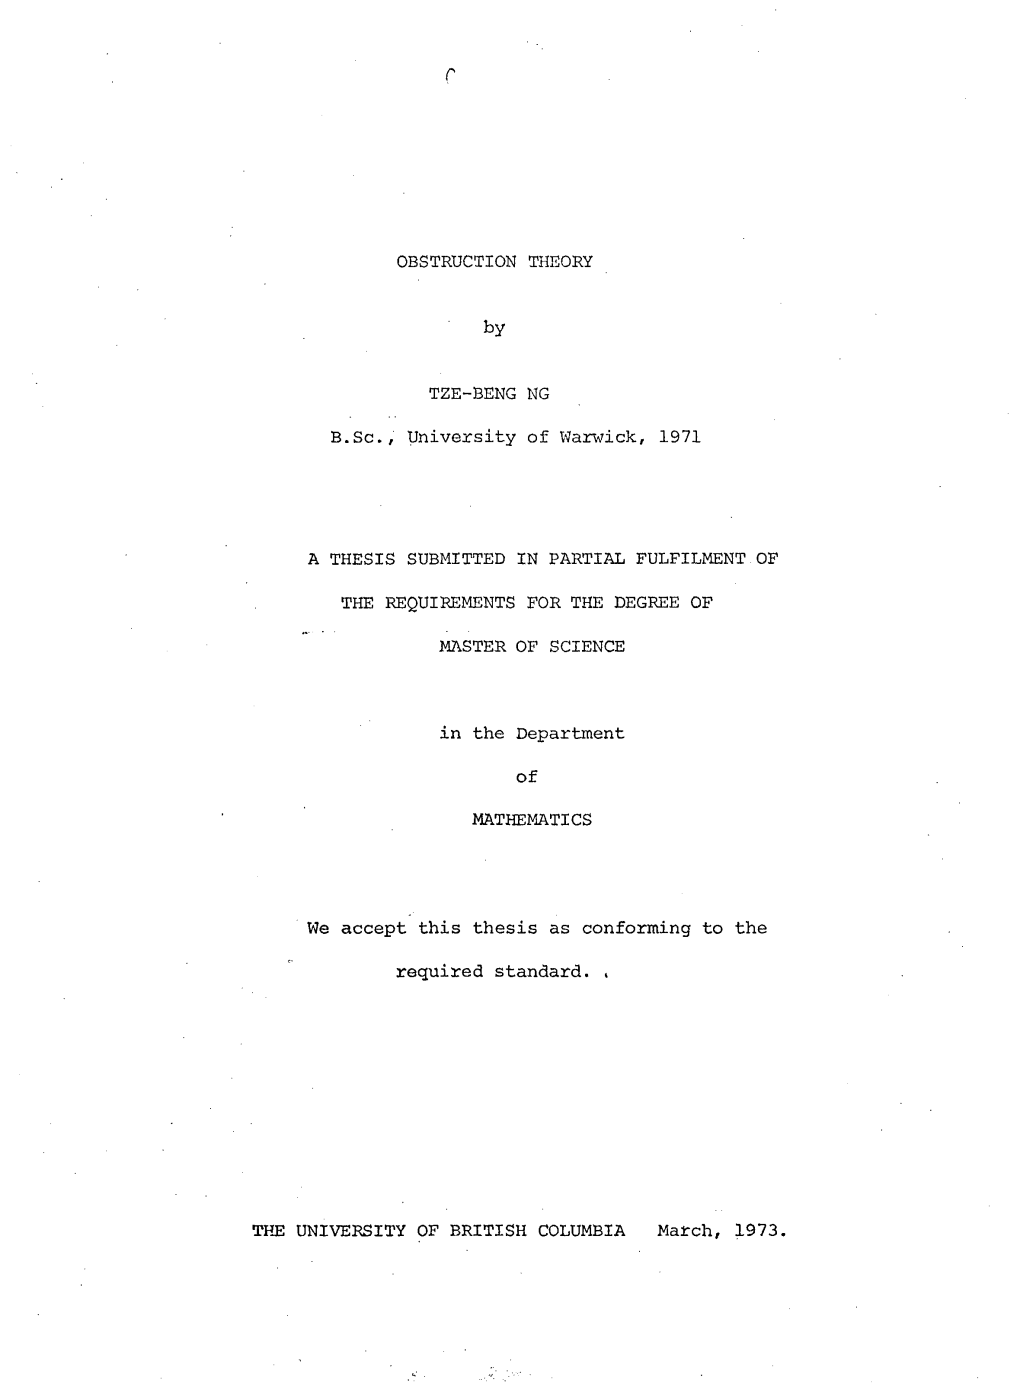 OBSTRUCTION THEORY by TZE-BENG NG B.Sc, University of Warwick, 1971 a THESIS SUBMITTED in PARTIAL FULFILMENT of the REQUIREMENTS